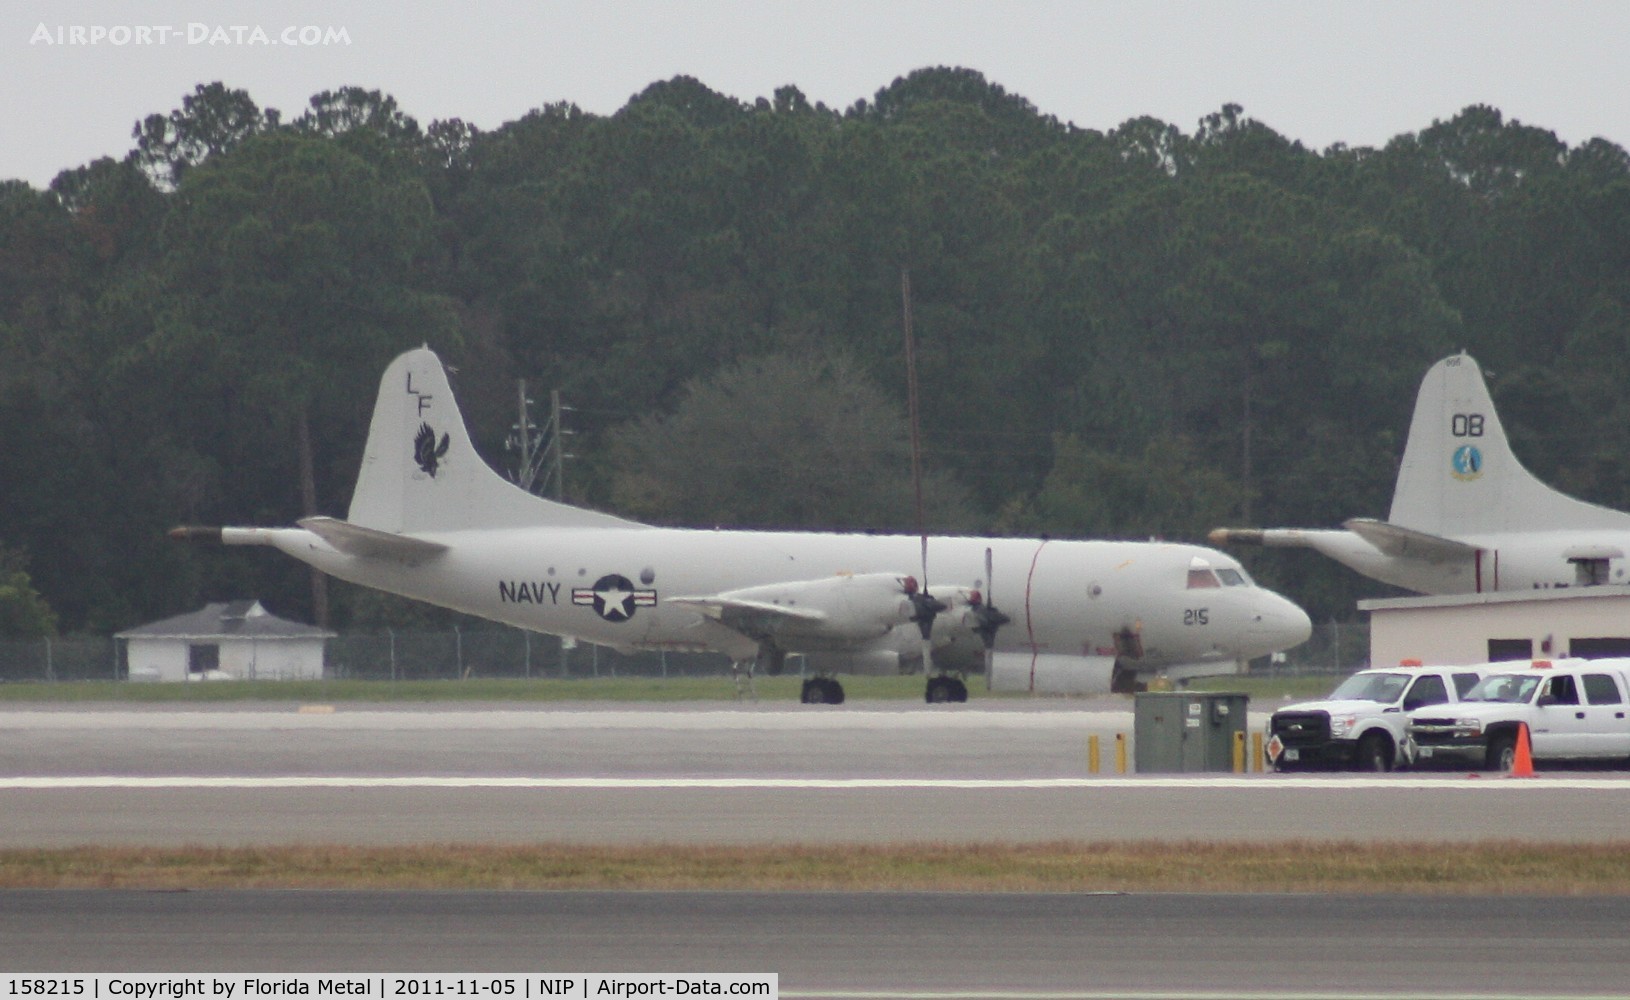 158215, 1971 Lockheed P-3C Orion C/N 285A-5560, P-3C Orion